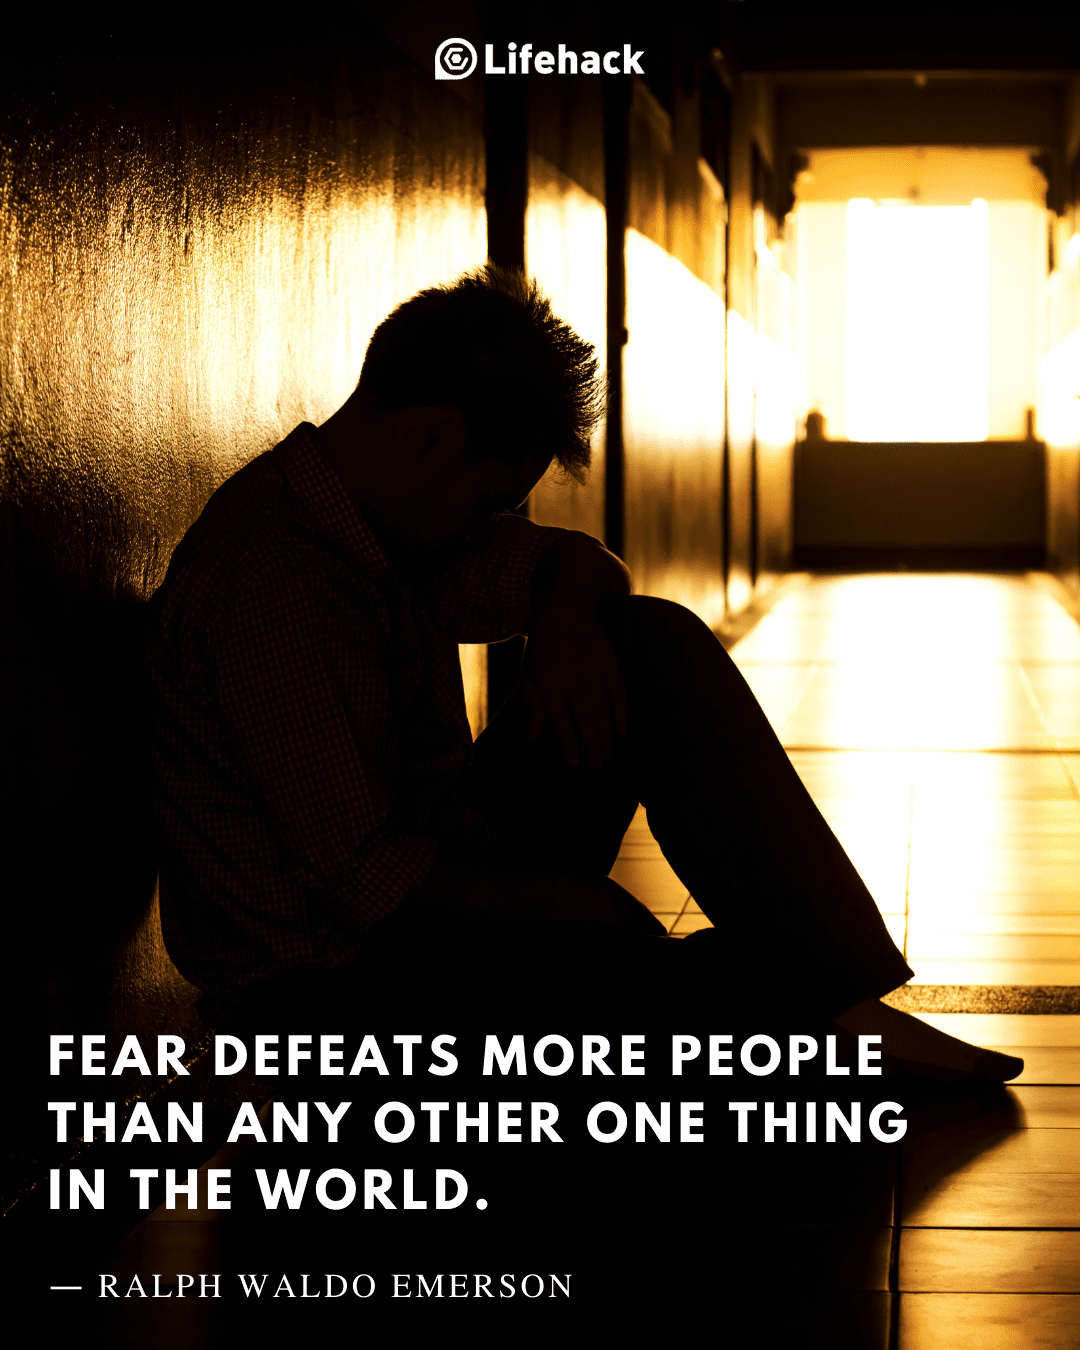 22 Inspiring Quotes About Fear to Help You Face Your Fear